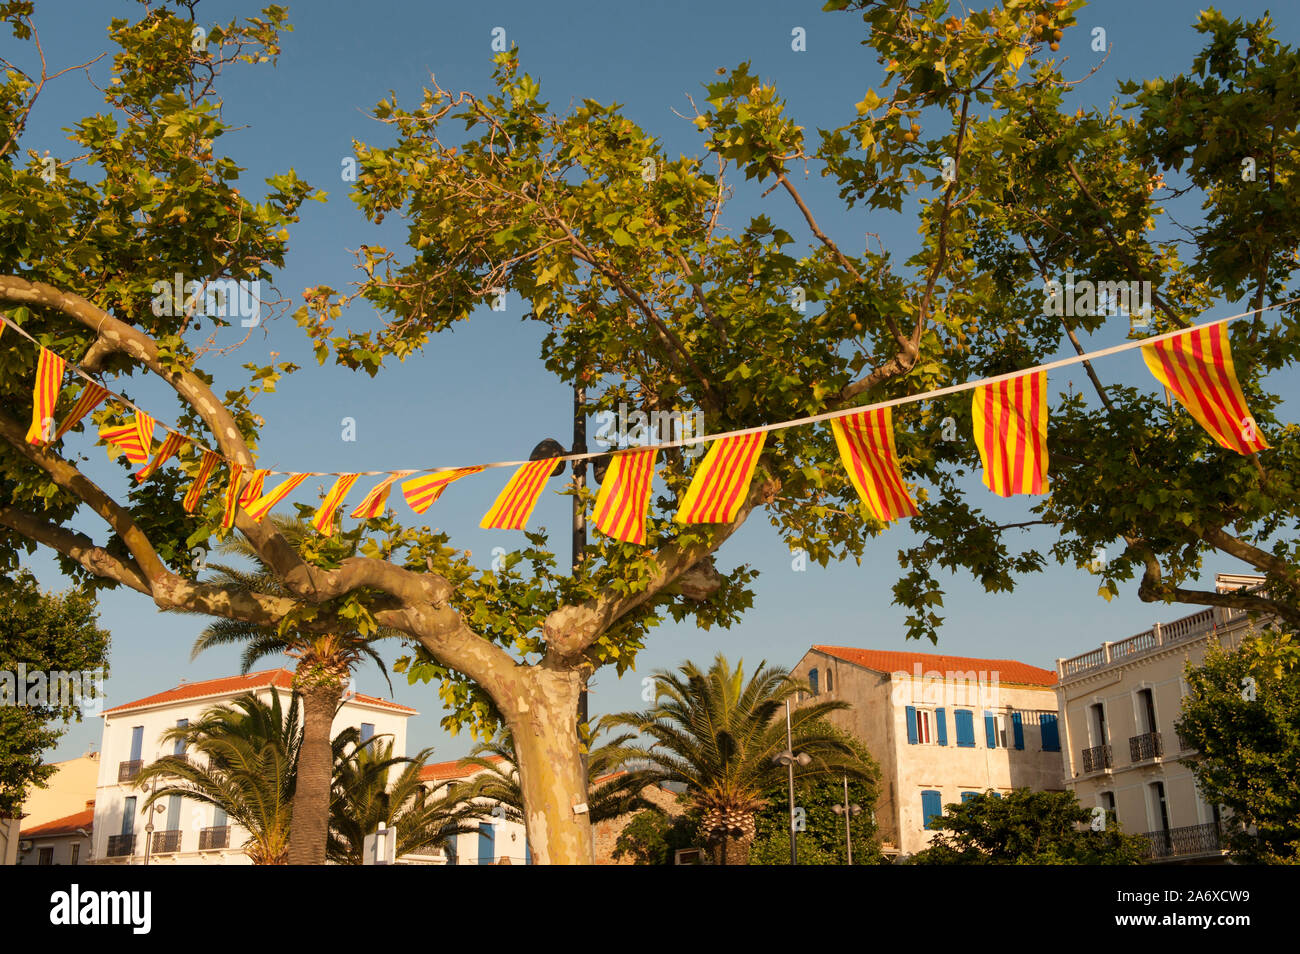 The beachfront promenade of Banyuls showing patriotism by waving the Catalan flag, Côte Vermeille, France Stock Photo